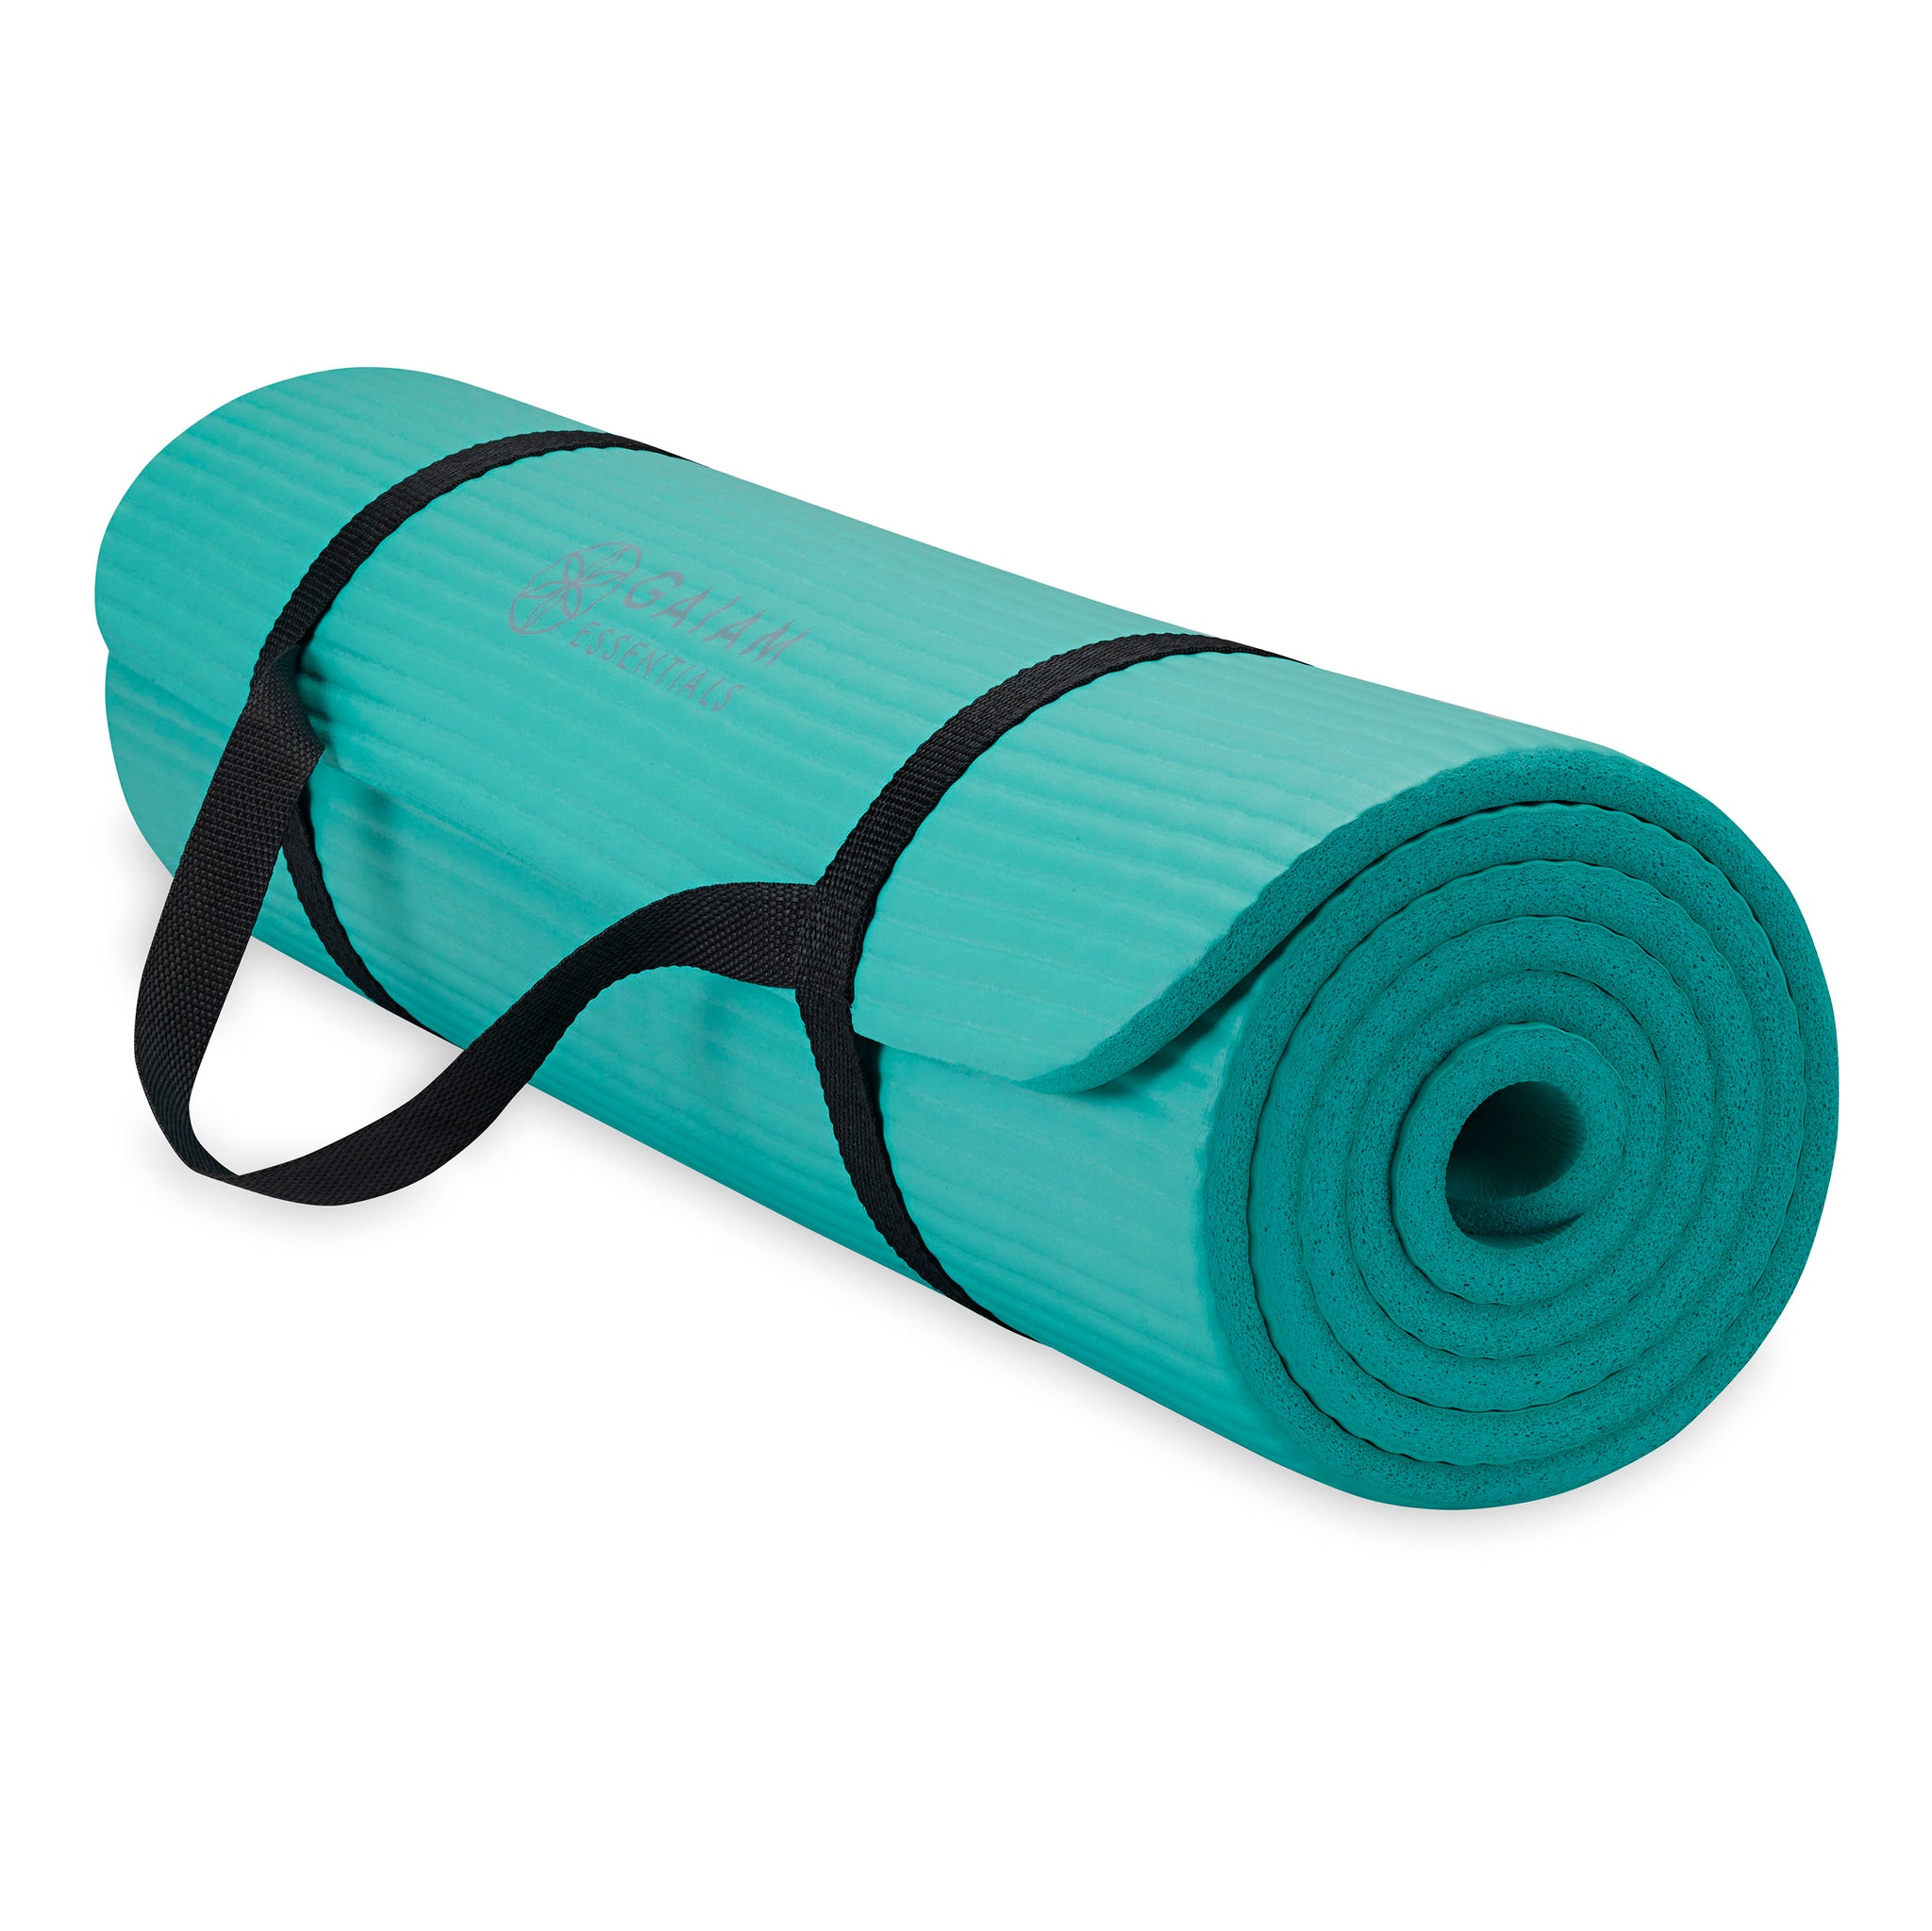 Buy Gaiam Perforated Breathable Yoga Mat online